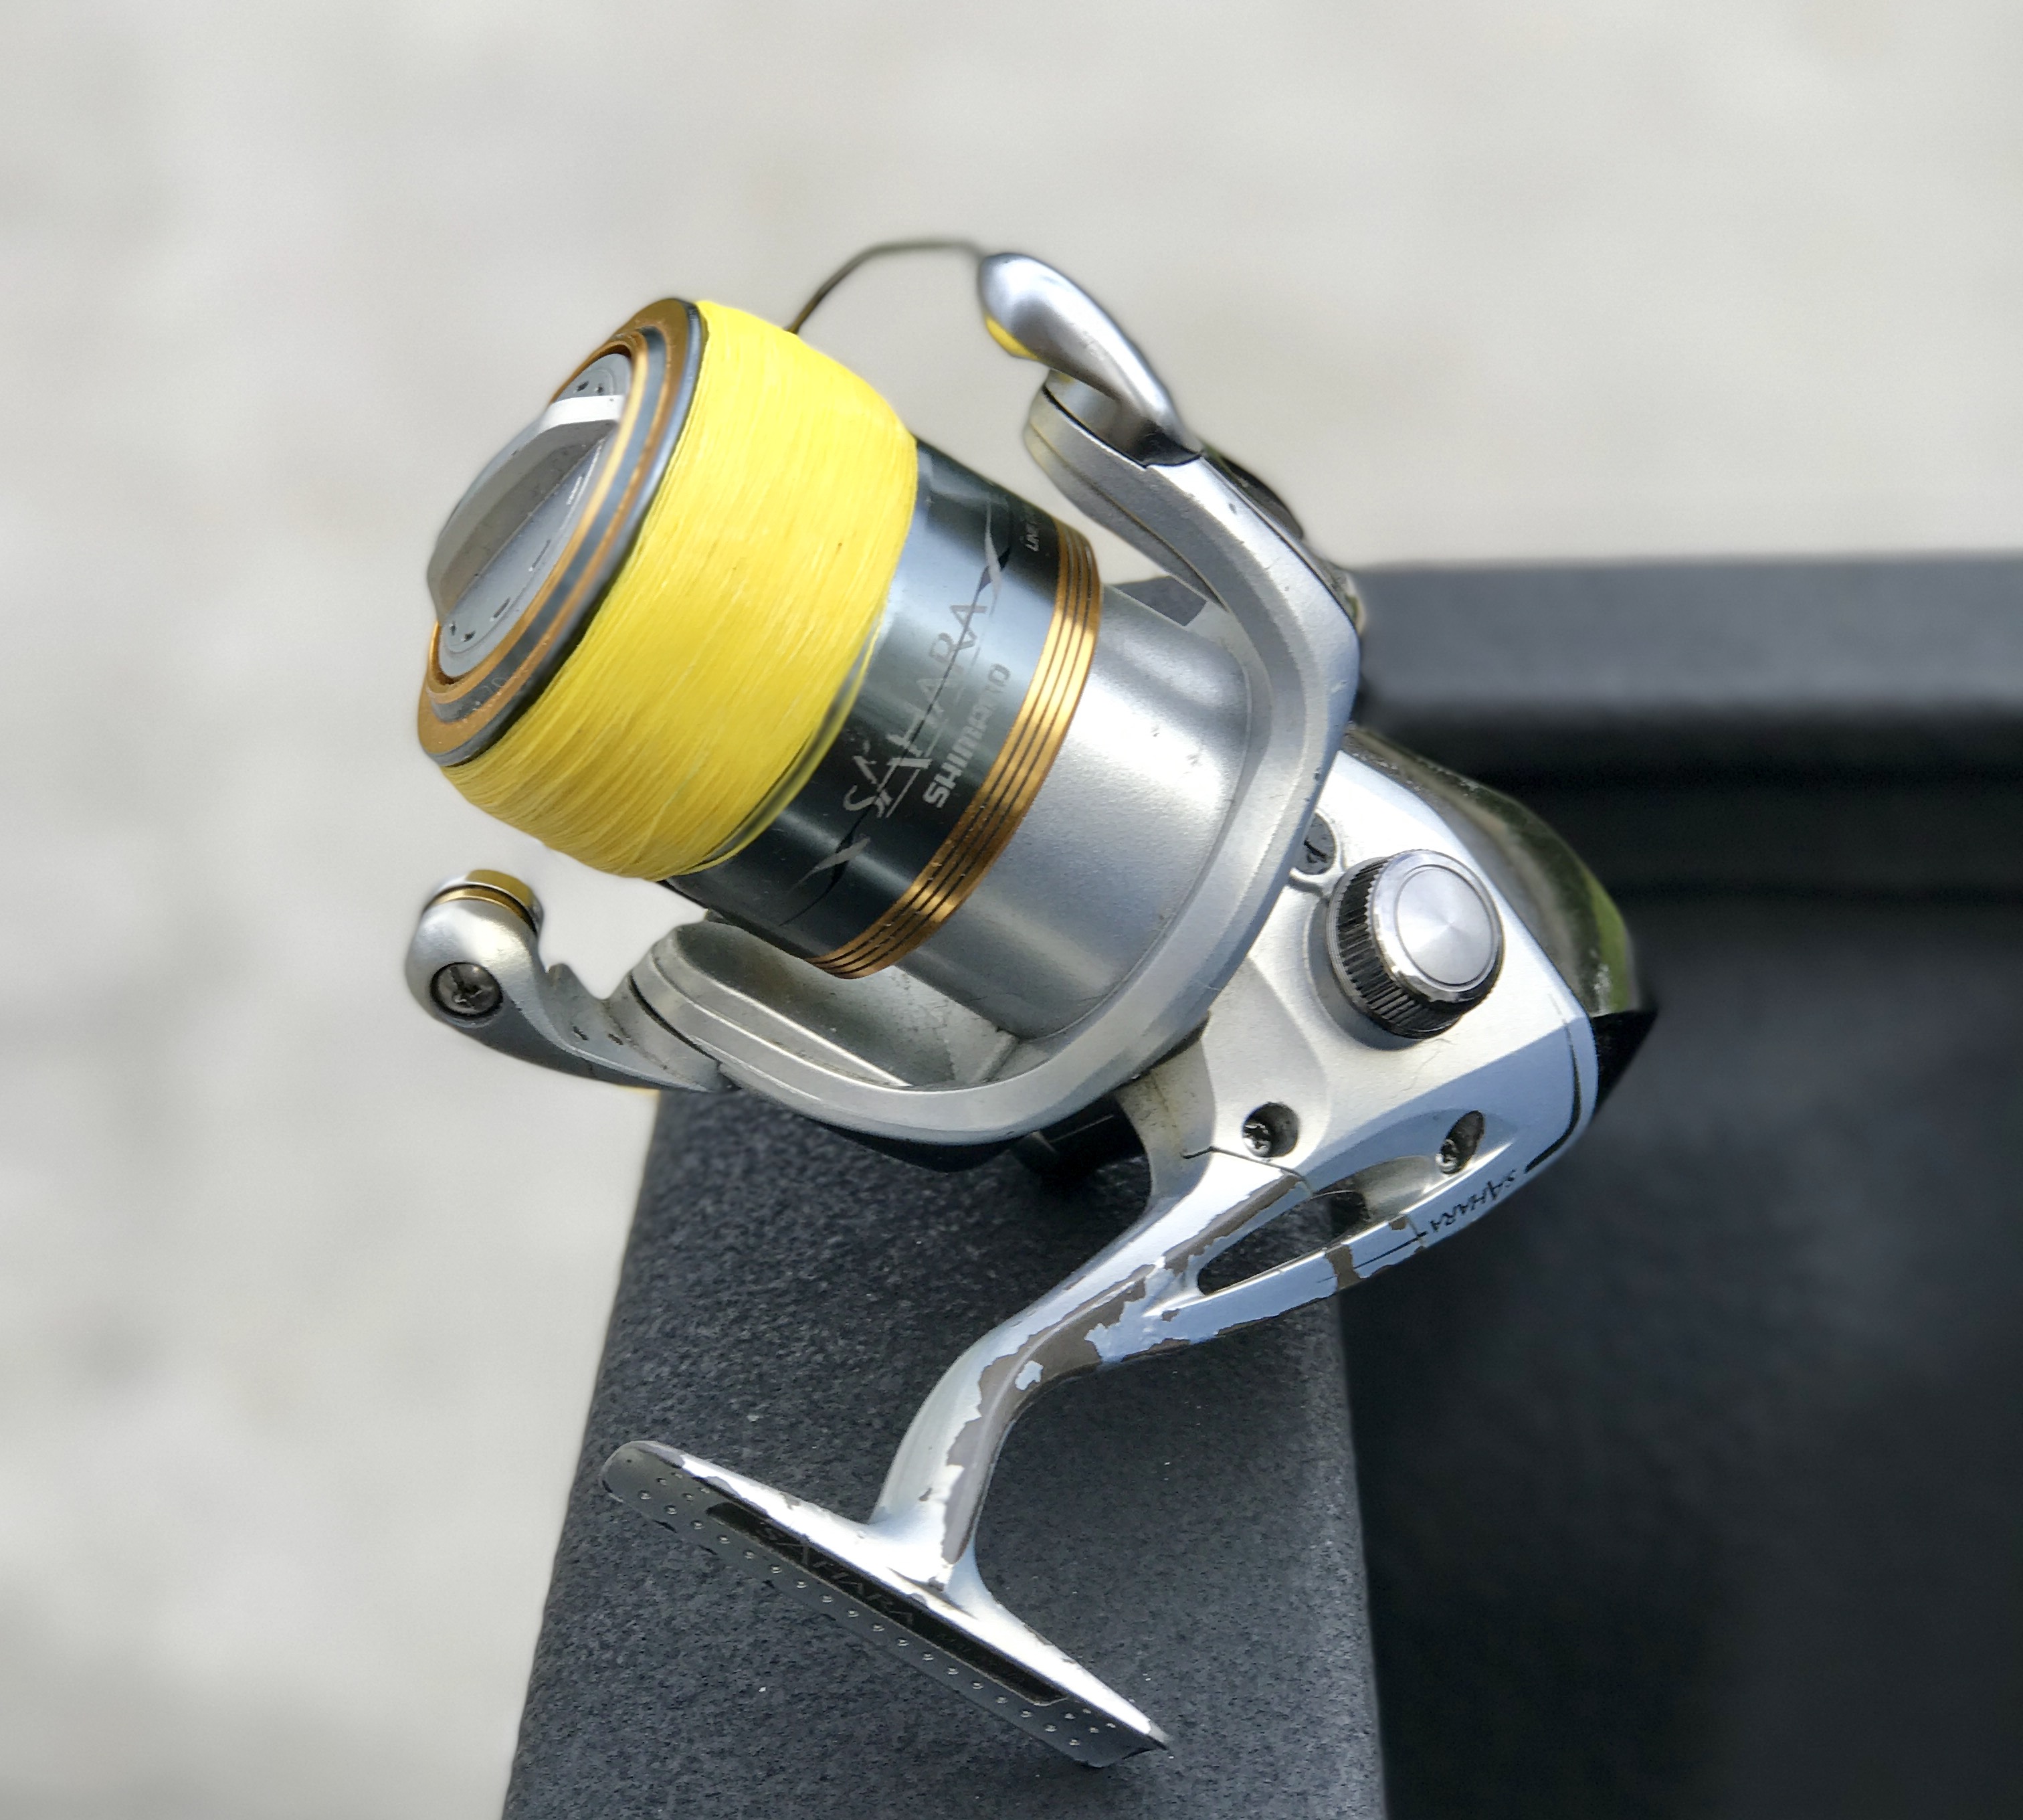 Do you get as much braid on your spinning reel as the manufacturer